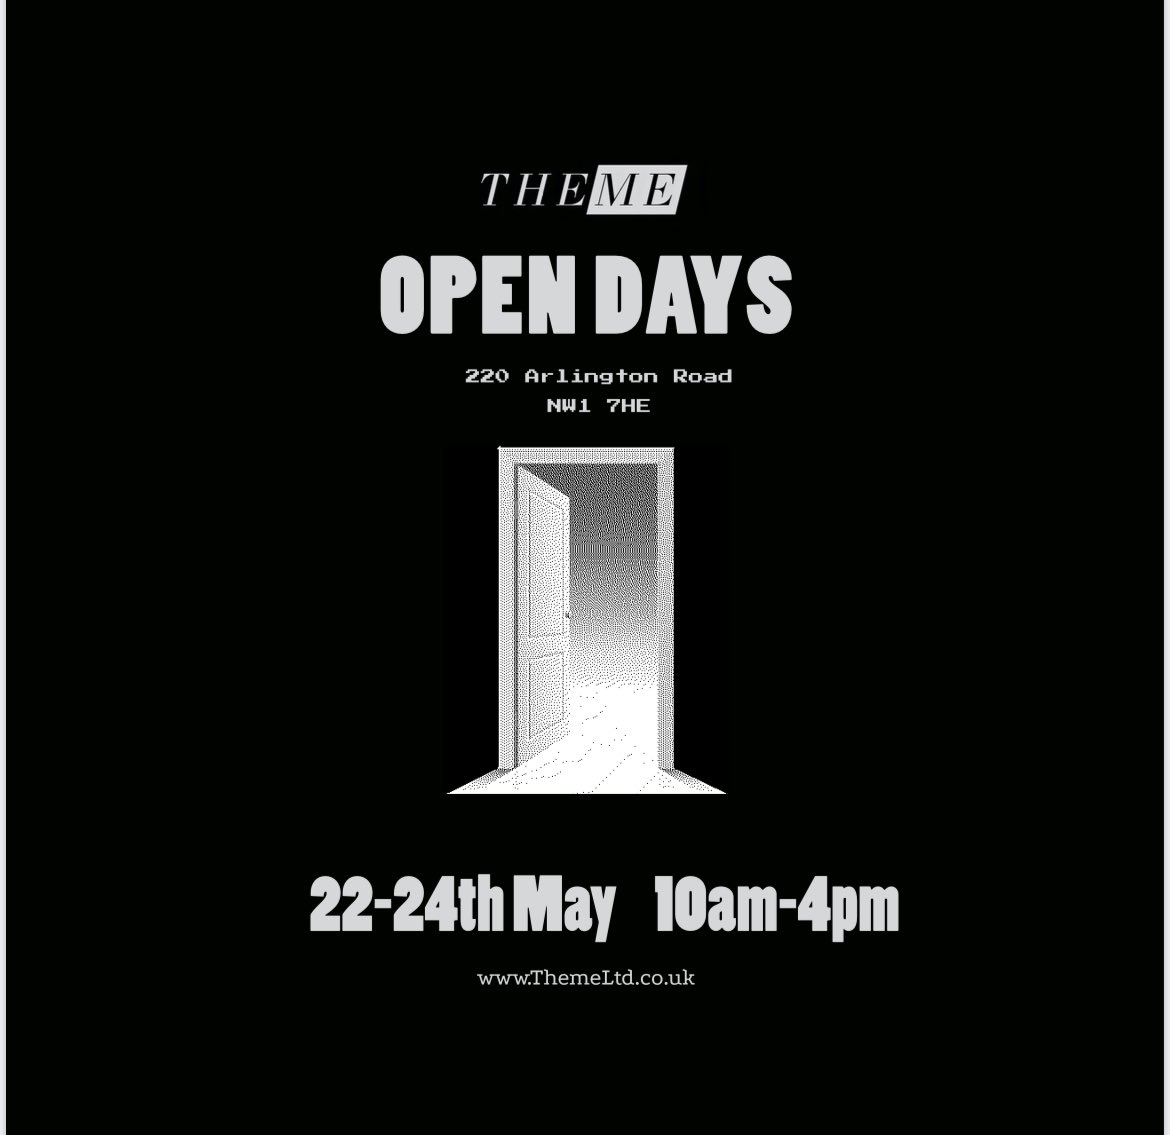 OPEN DAYS THIS WEEK COME DOWN AND CHECK OUT OUR STUDIO !